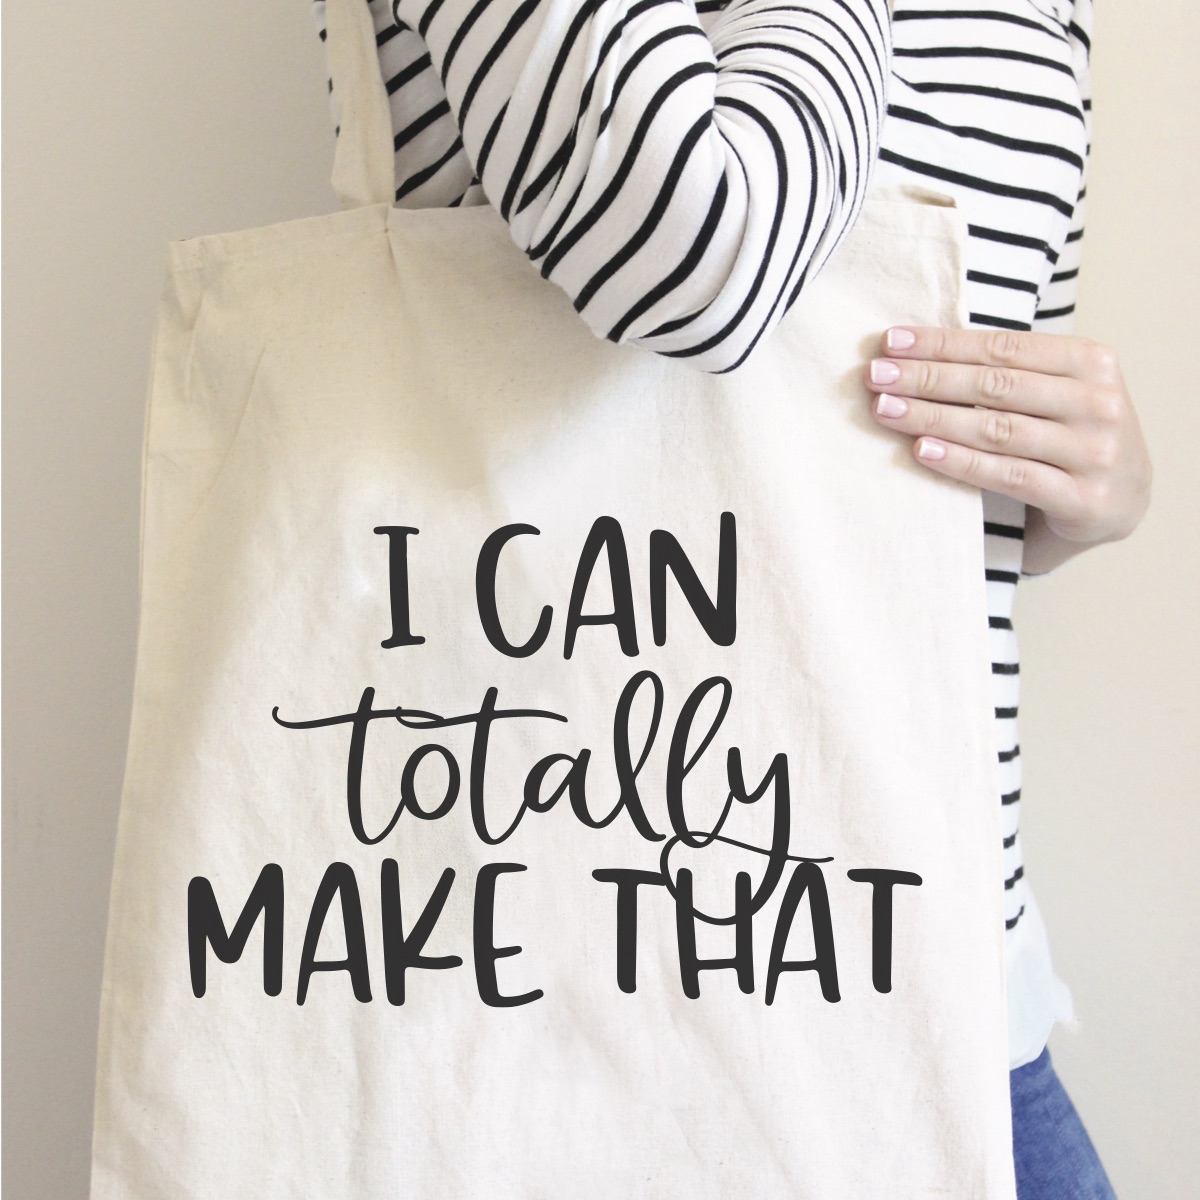 I can totally make that tote bag